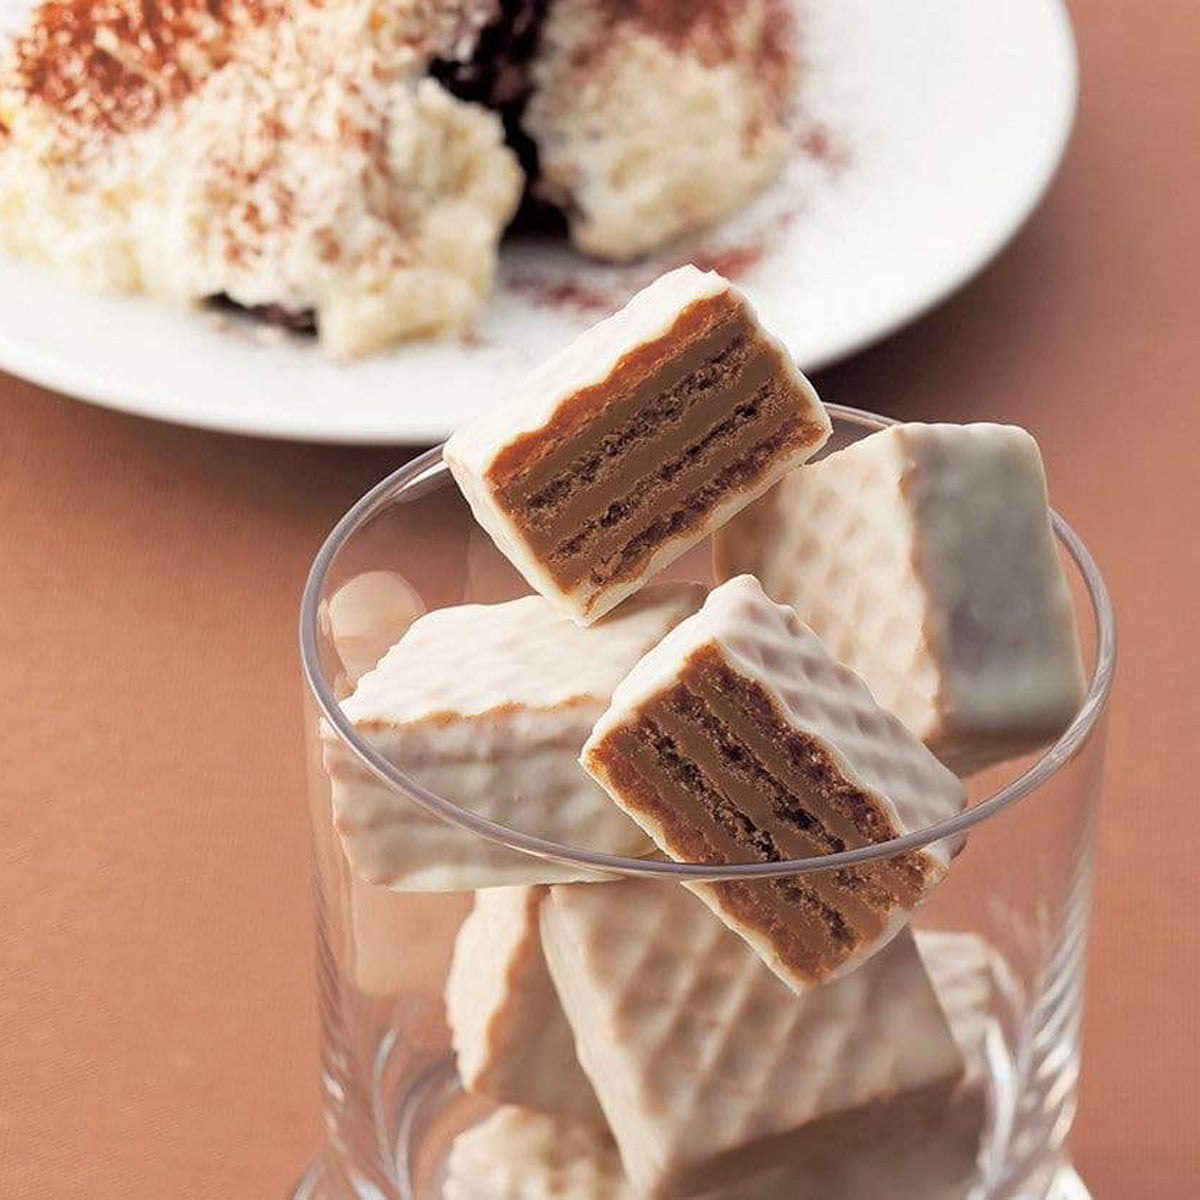 ROYCE' Chocolate - Chocolate Wafers "Tiramisu Cream" - Image shows white chocolate wafers with brown filling inside a clear round glass. Background is in brown color and has a blurred background image of a white plate with tiramisu.